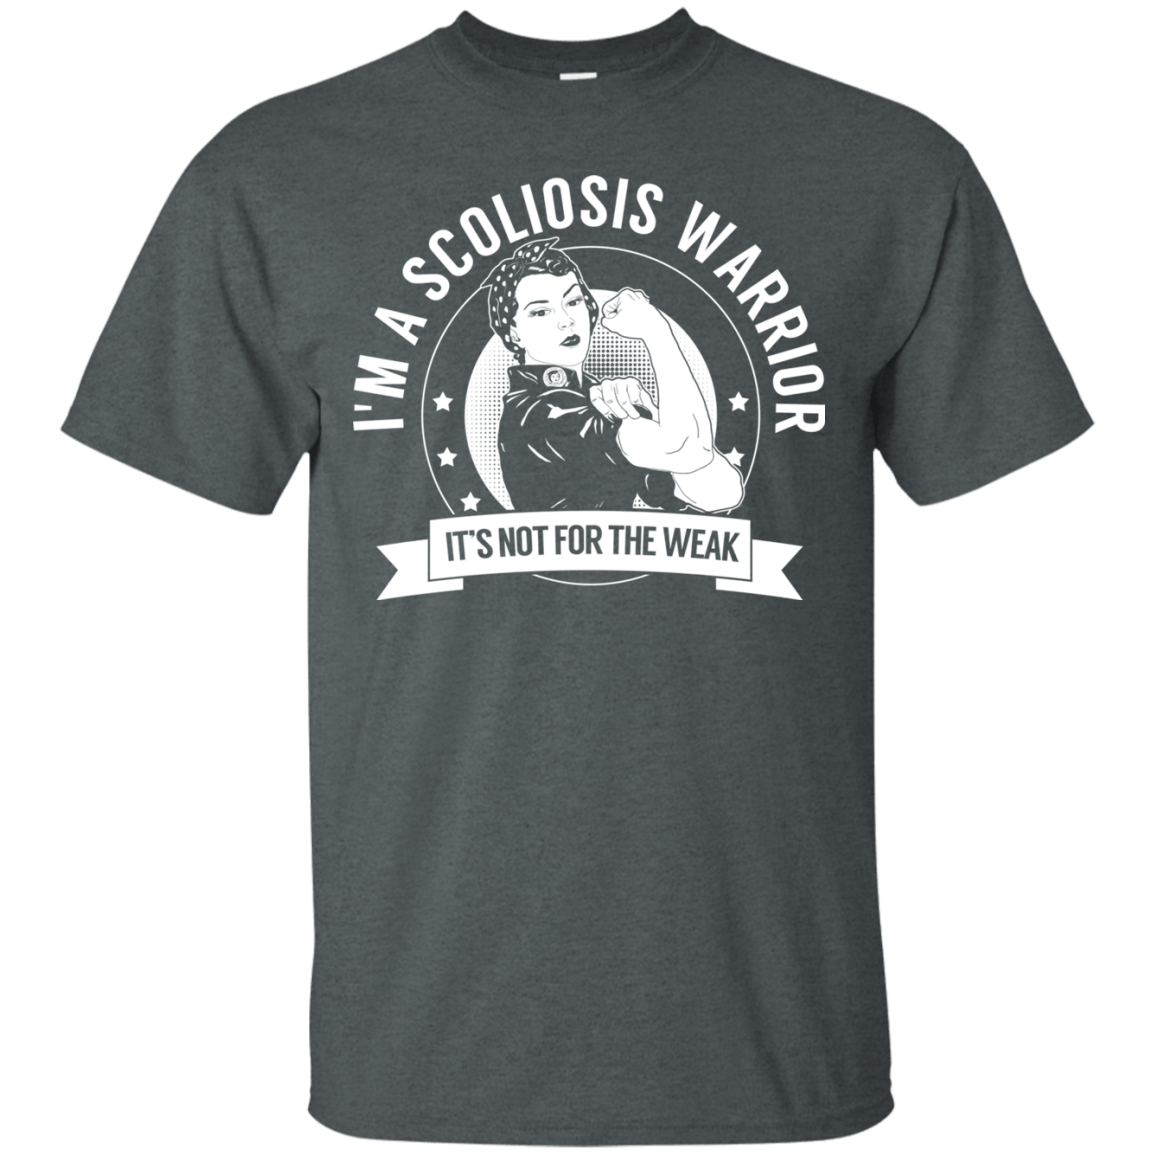 Scoliosis Warrior Not For The Weak Unisex Shirt - The Unchargeables